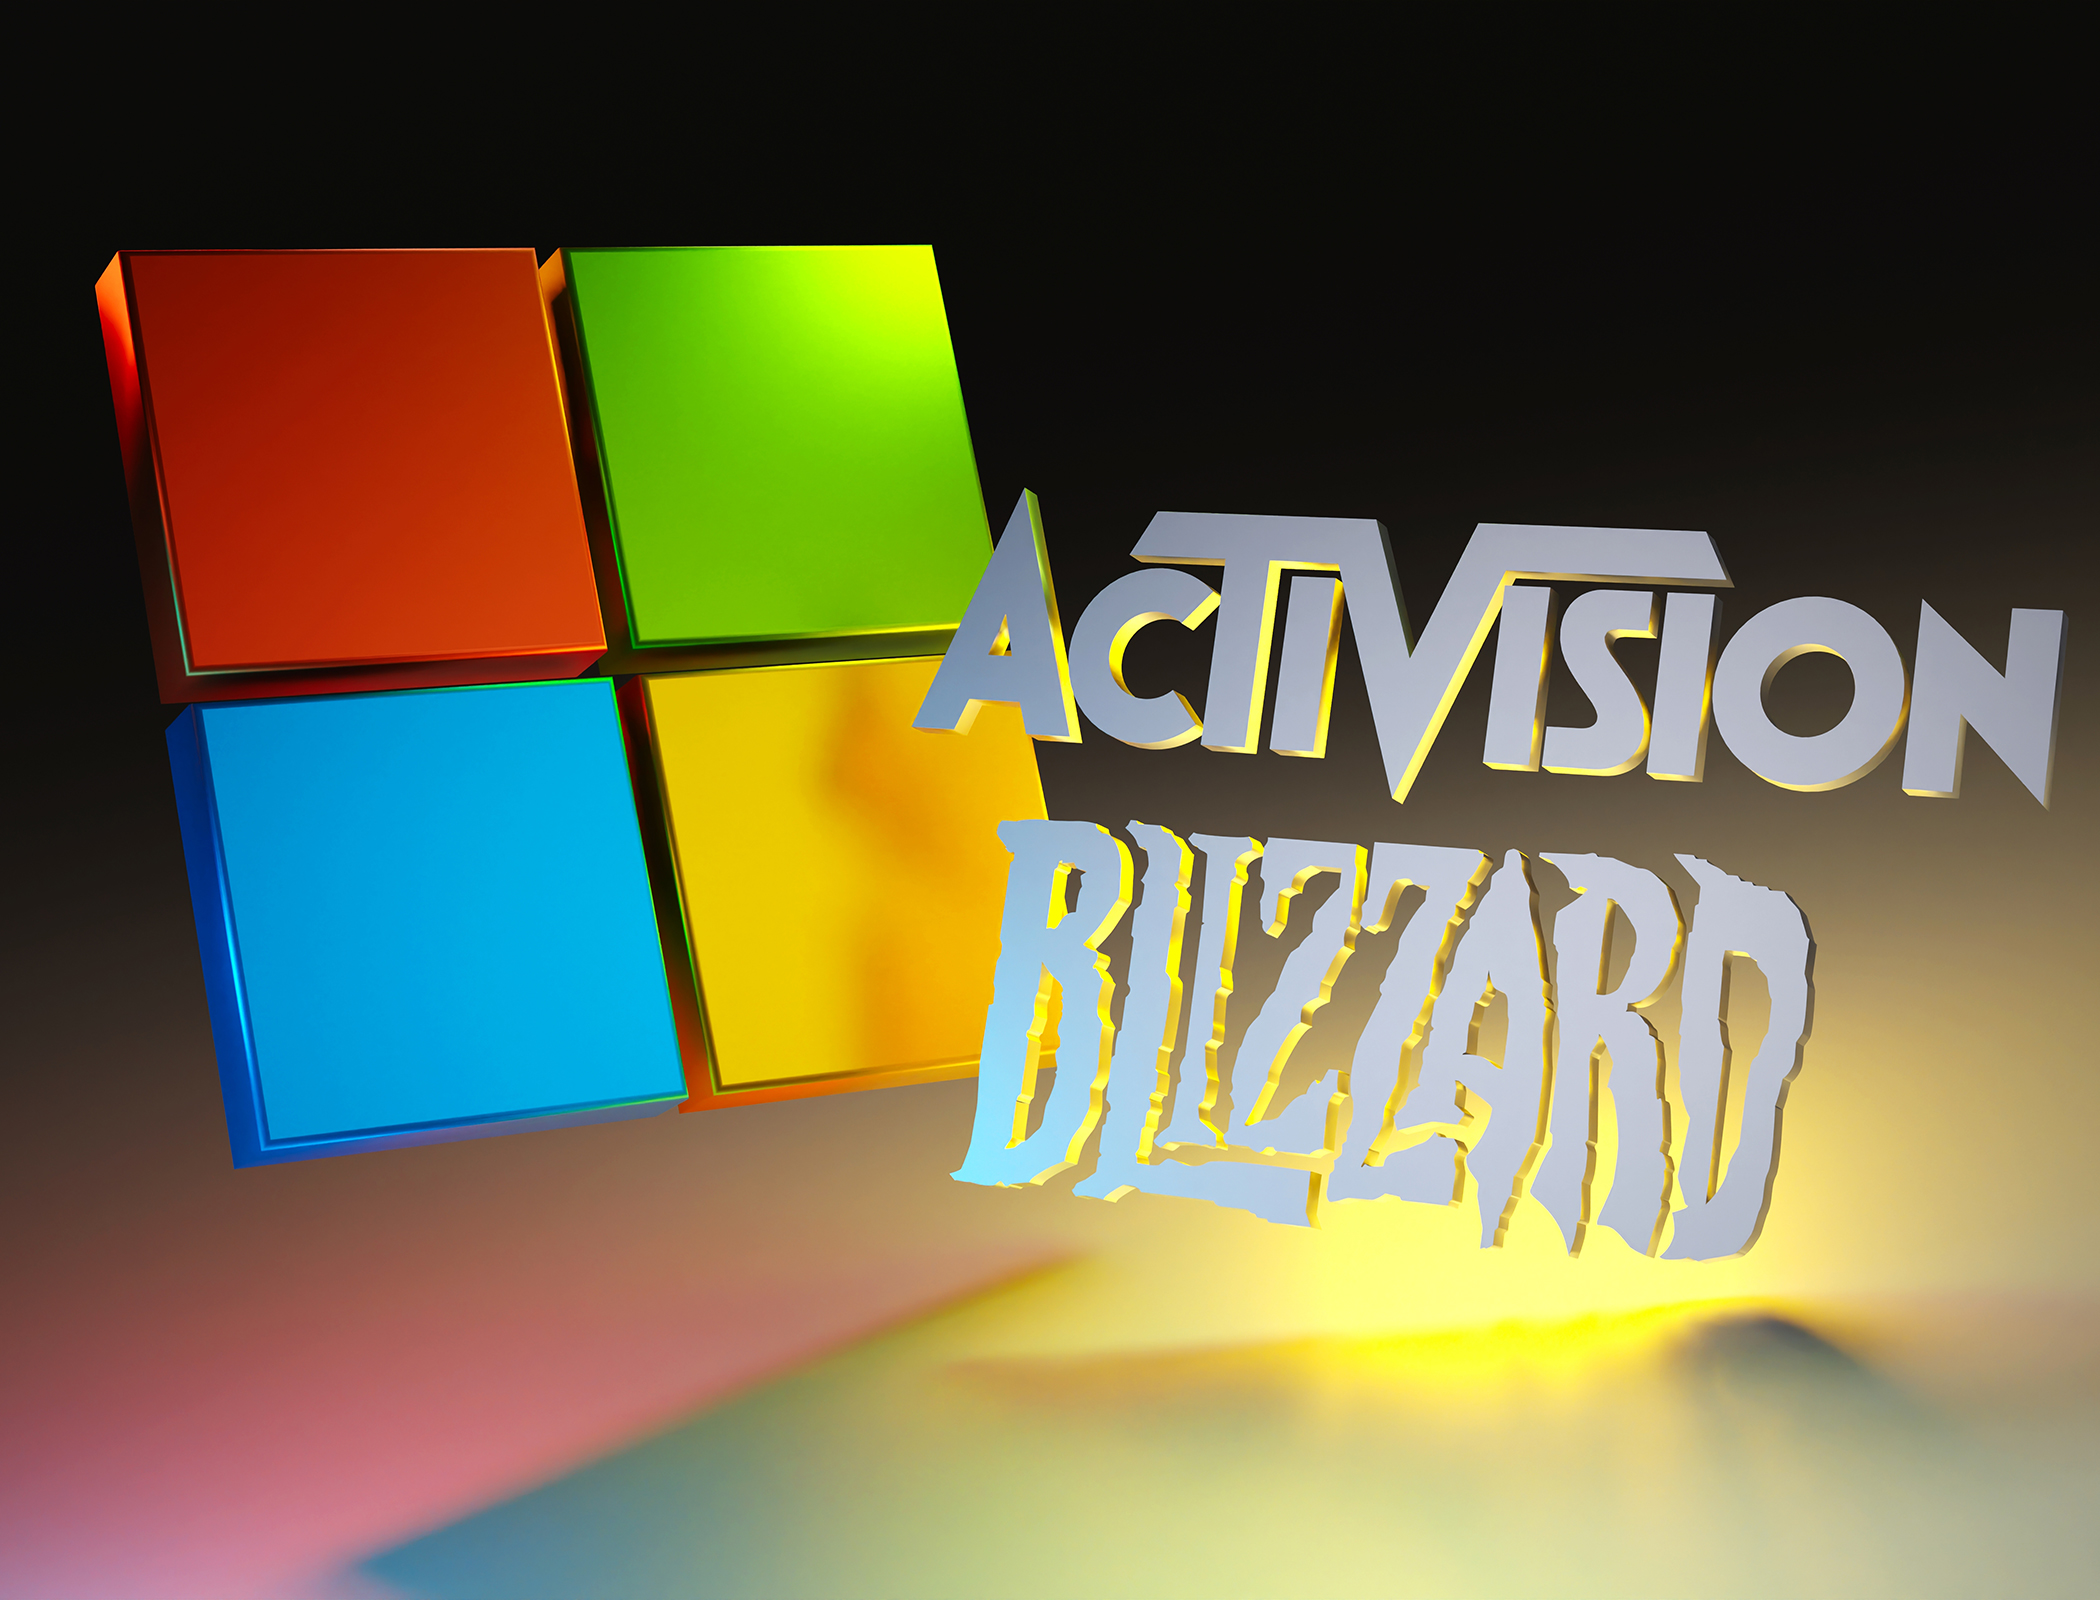 Microsoft could sell Activision’s streaming rights to secure UK regulatory approval